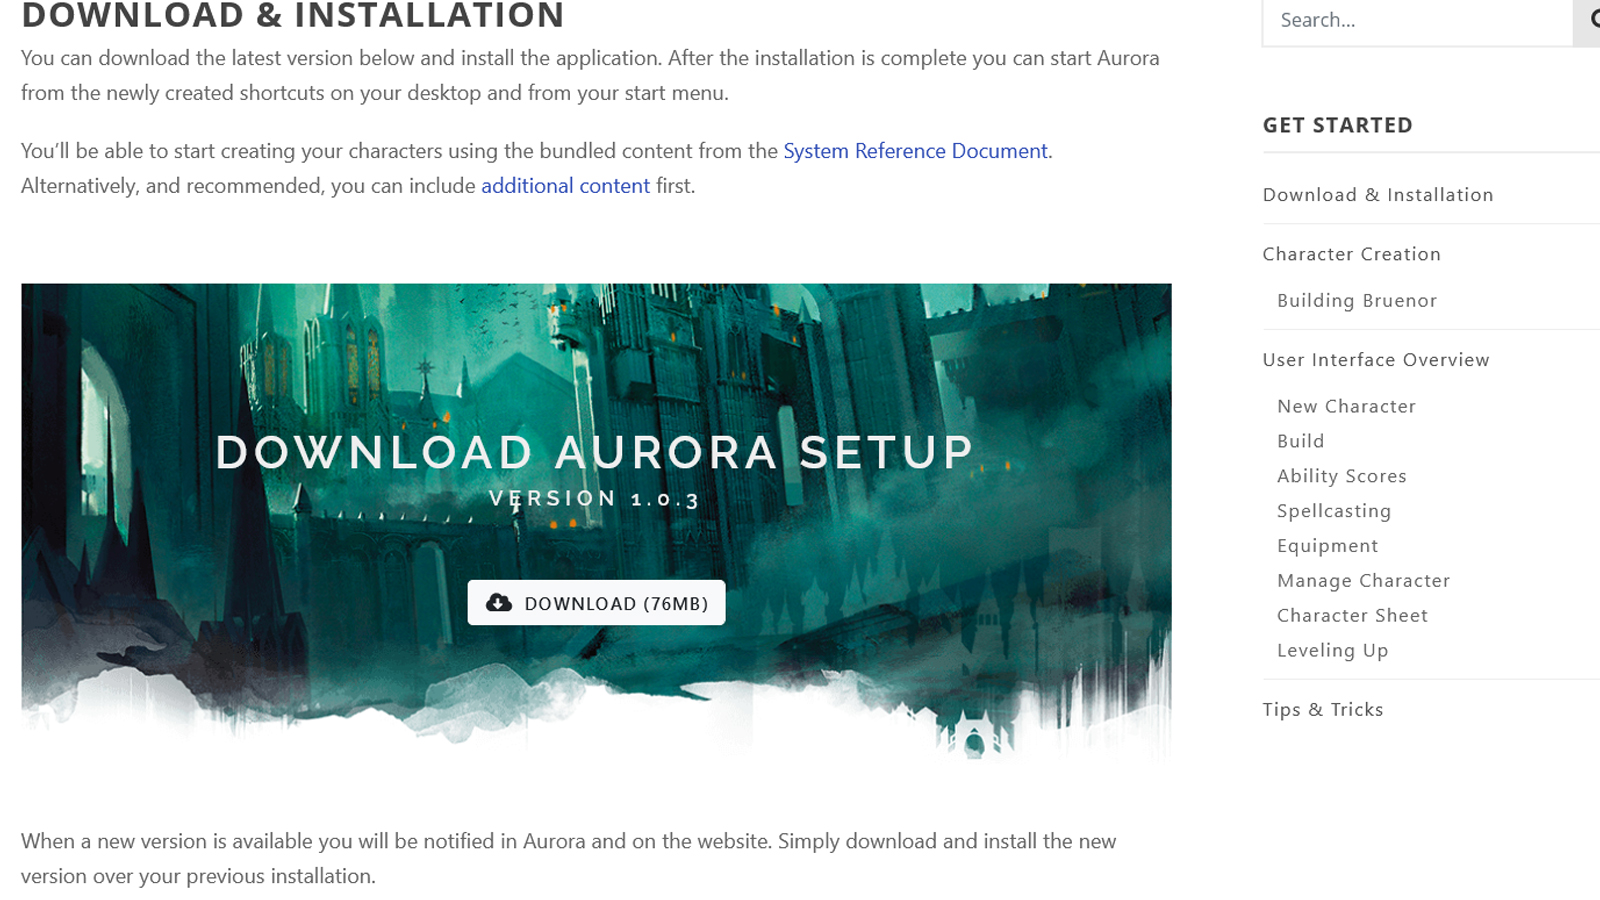 Find pricing, reviews and other details about Aurora Builder